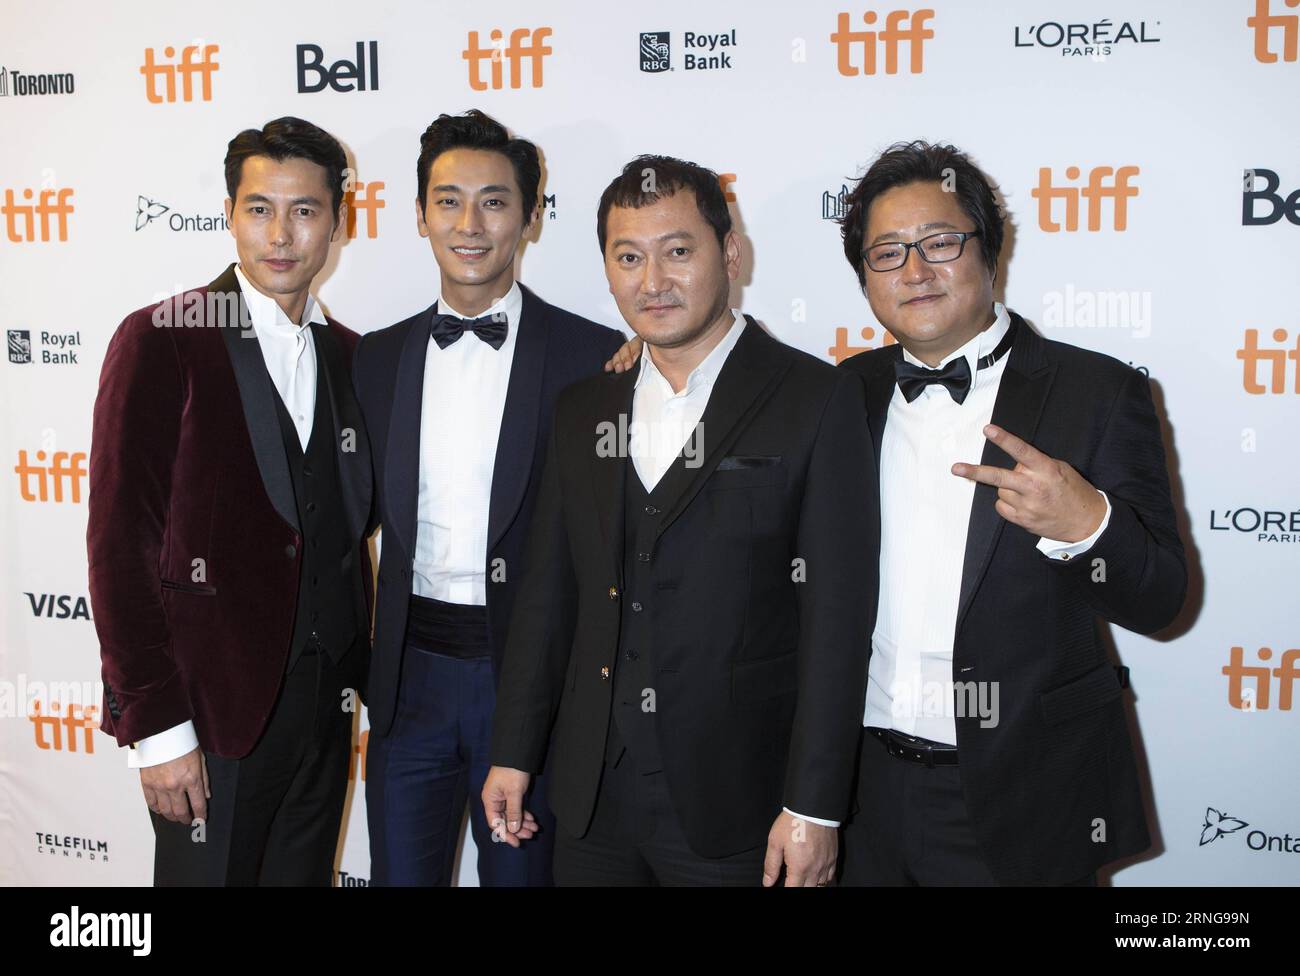 (160914) -- TORONTO, Sept. 13, 2016 -- South Korean actors Jung Woo-Sung, Ju Ji-hoon, Jung Man-sik and Kwak Do-won (L-R) pose for photos before the world premiere of the film Asura: The City of Madness at the Elgin Theater during the 41st Toronto International Film Festival in Toronto, Canada, Sept. 13, 2016. ) (lrz) CANADA-TORONTO-FILM FESTIVAL- ASURA ZouxZheng PUBLICATIONxNOTxINxCHN   160914 Toronto Sept 13 2016 South Korean Actors Young Woo Recovery JU ji Hoon Young Man Sik and Kwak Do Won l r Pose for Photos Before The World Premiere of The Film Asura The City of Madness AT The Elgin Theat Stock Photo